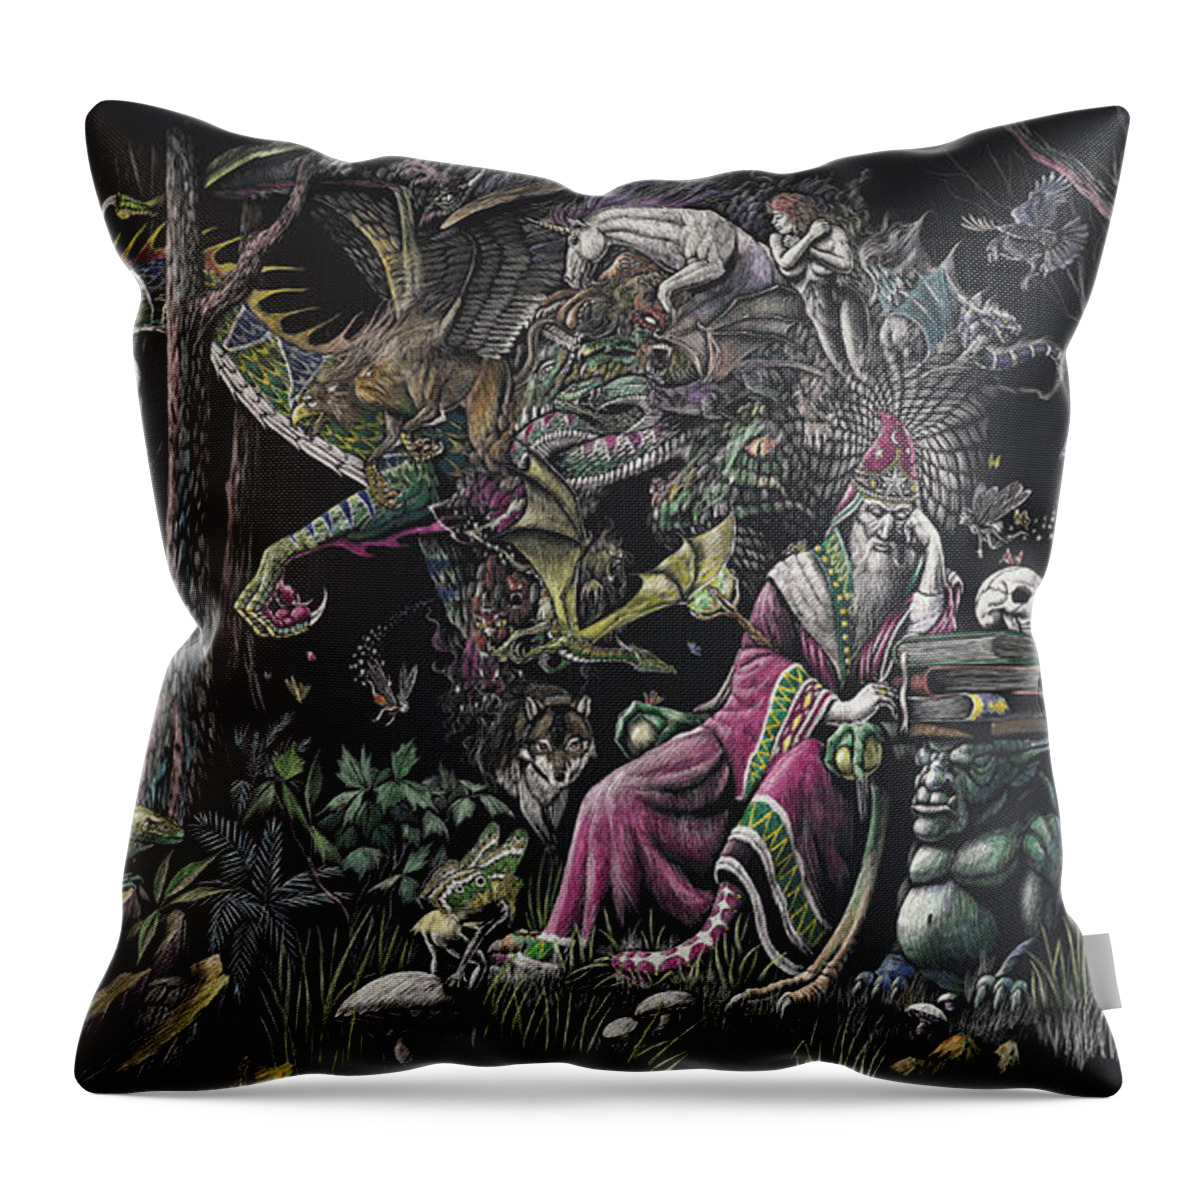 Dragon Throw Pillow featuring the drawing When Wizards Dream by Stanley Morrison